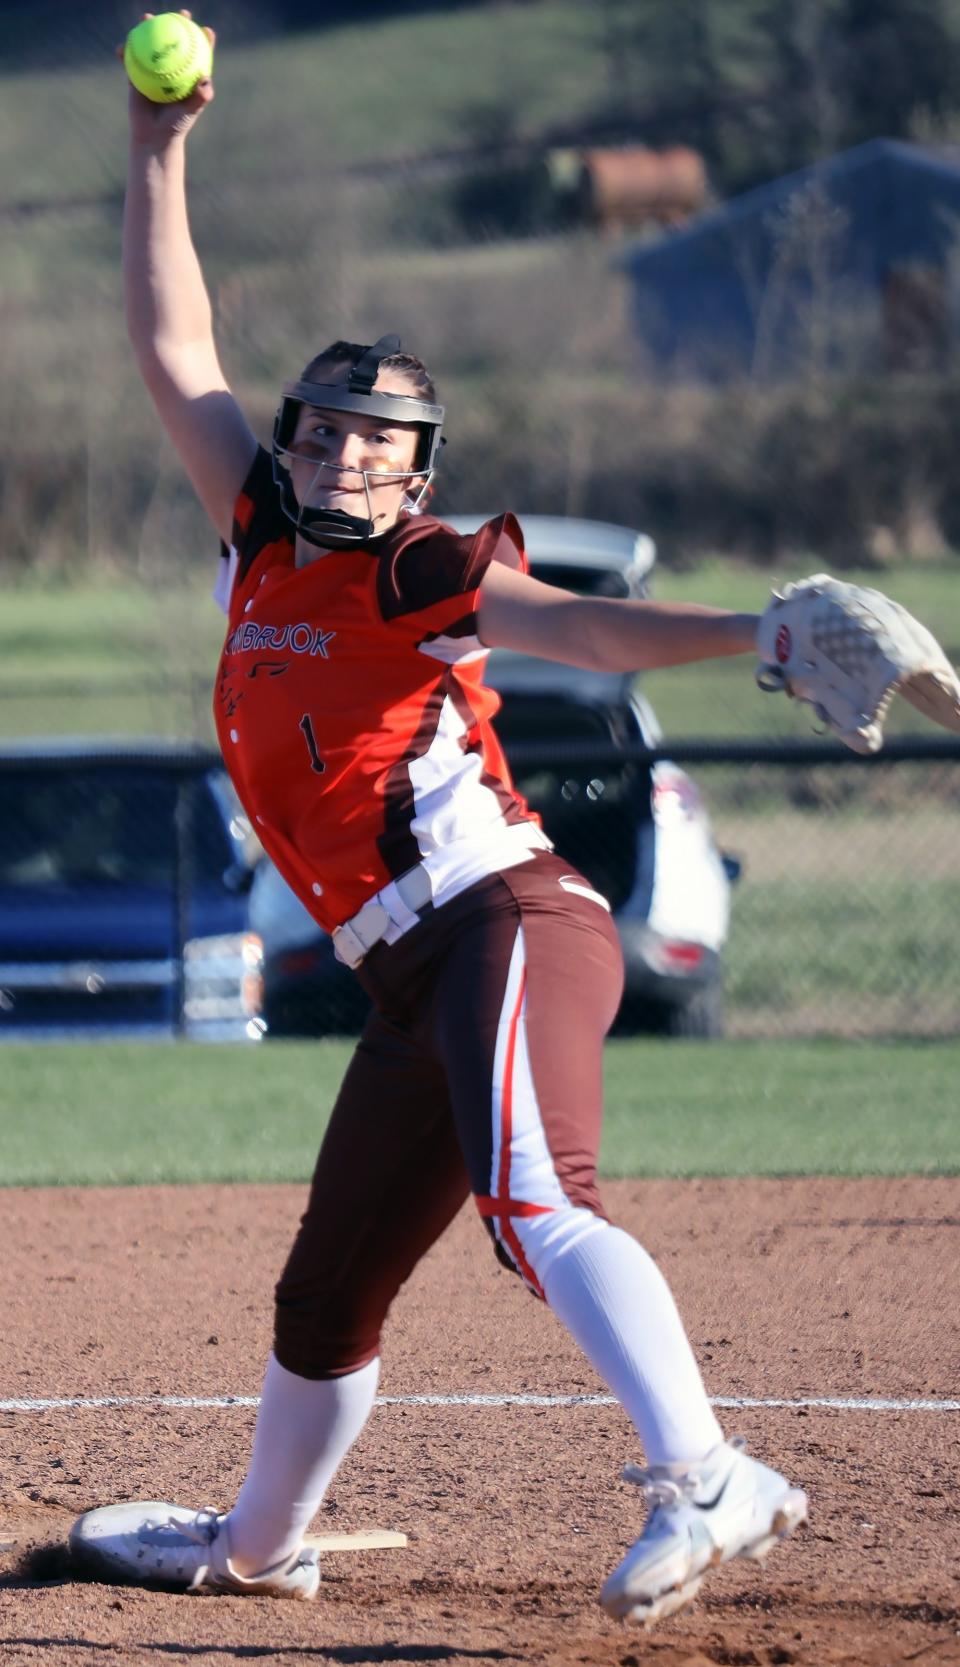 Meadowbrook sophomore Addy Sichina (1) pitches the ball during the Colts versus Bobcats softball game Friday night at Meadowbrook. Sichina has been a key to the Lady Colts getting off to a 6-2 start to the year. Sichina sports a 4-0 pitching record with an impressive 0.88 ERA.